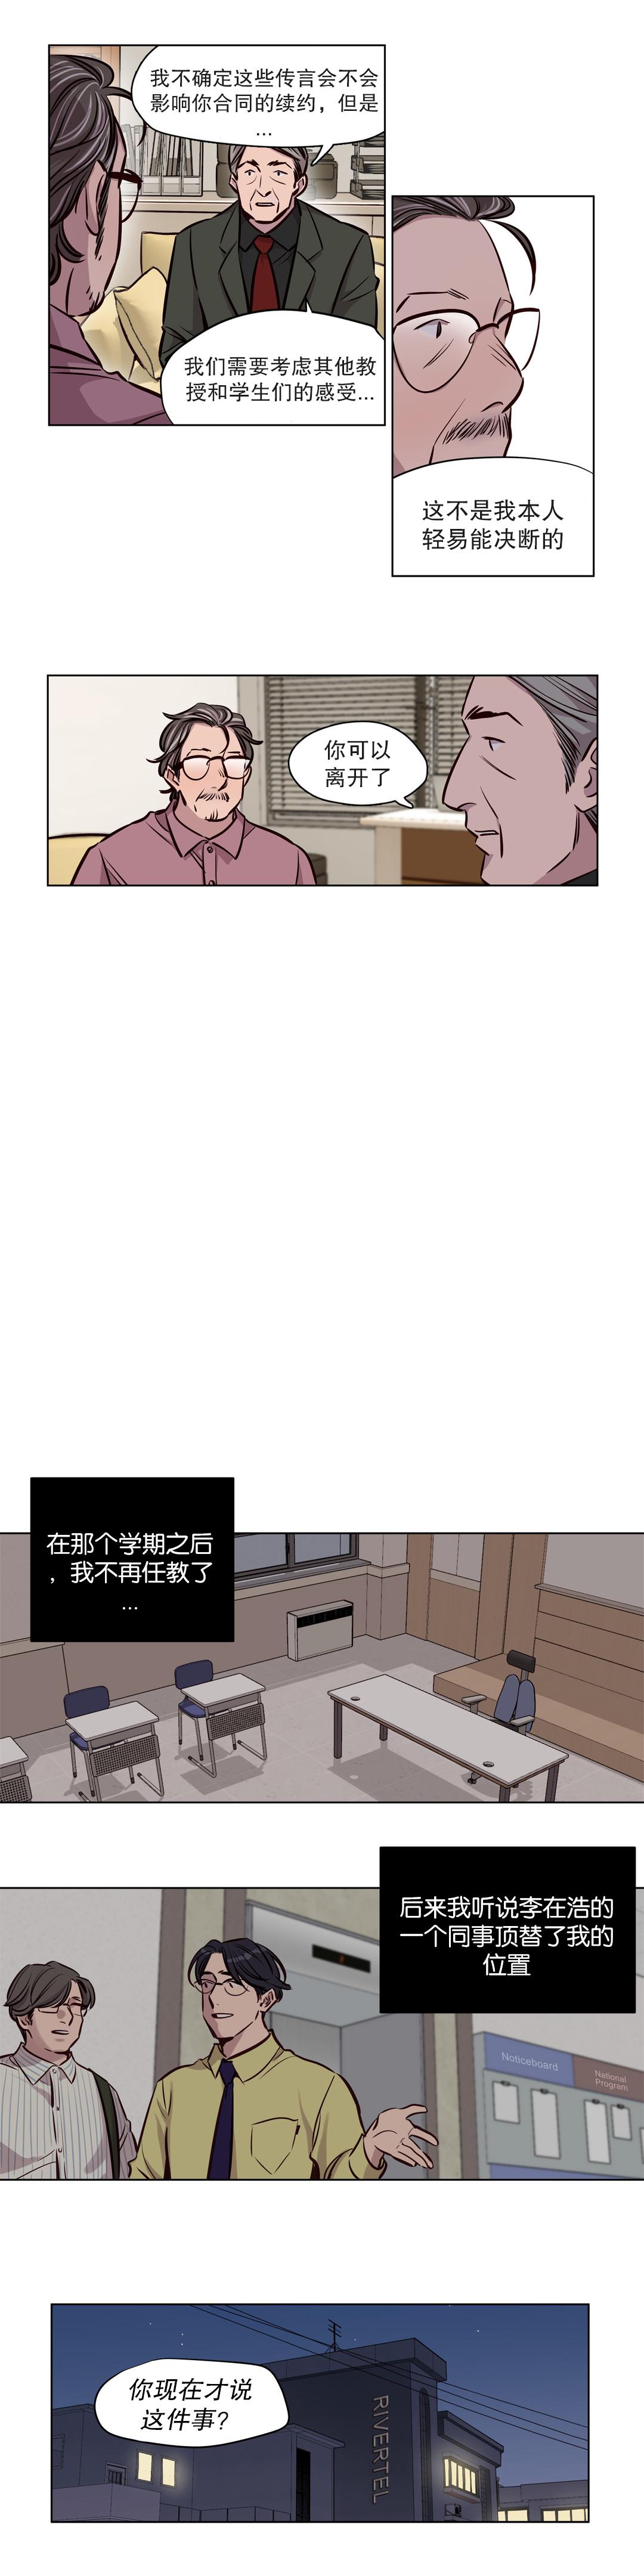 18 Year Old [Ramjak] 赎罪营(Atonement Camp) Ch.50-52 (Chinese) Mallu - Page 5